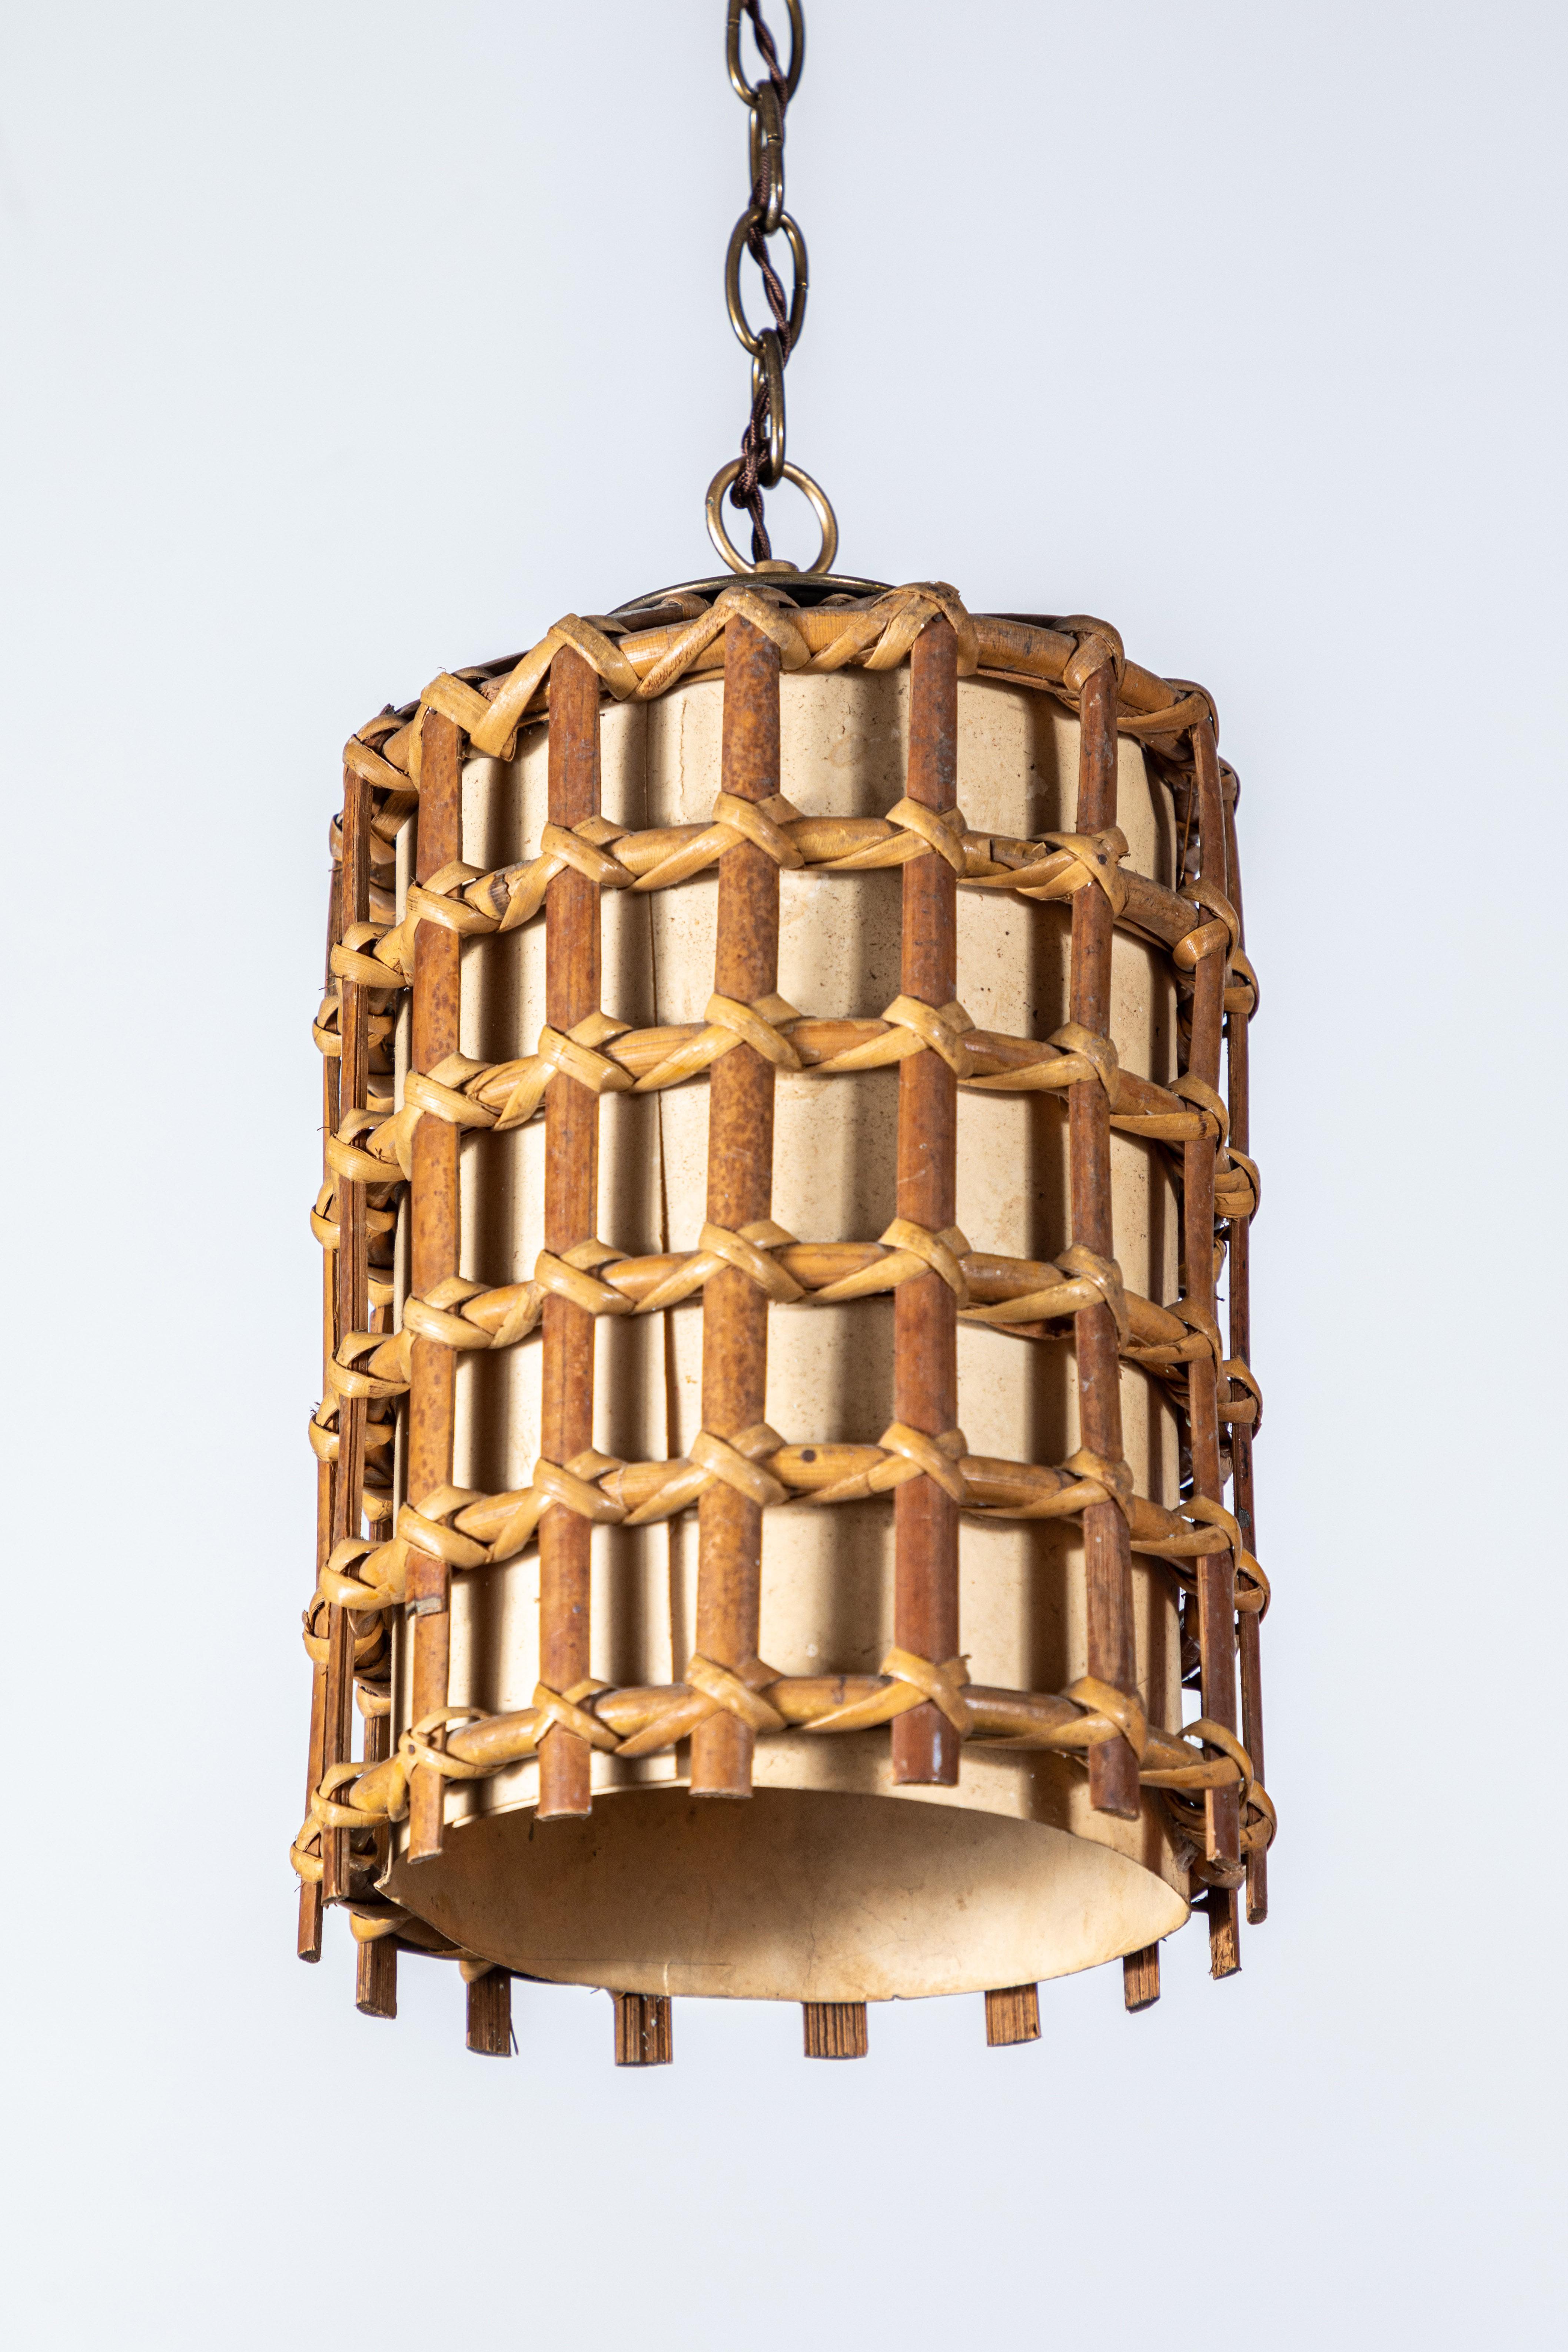 French bamboo lantern pendant with illuminated cream paper, antique brass chain and brown twist cord added. Pendant has been newly re-wired.

Two lanterns available: 
Small 8